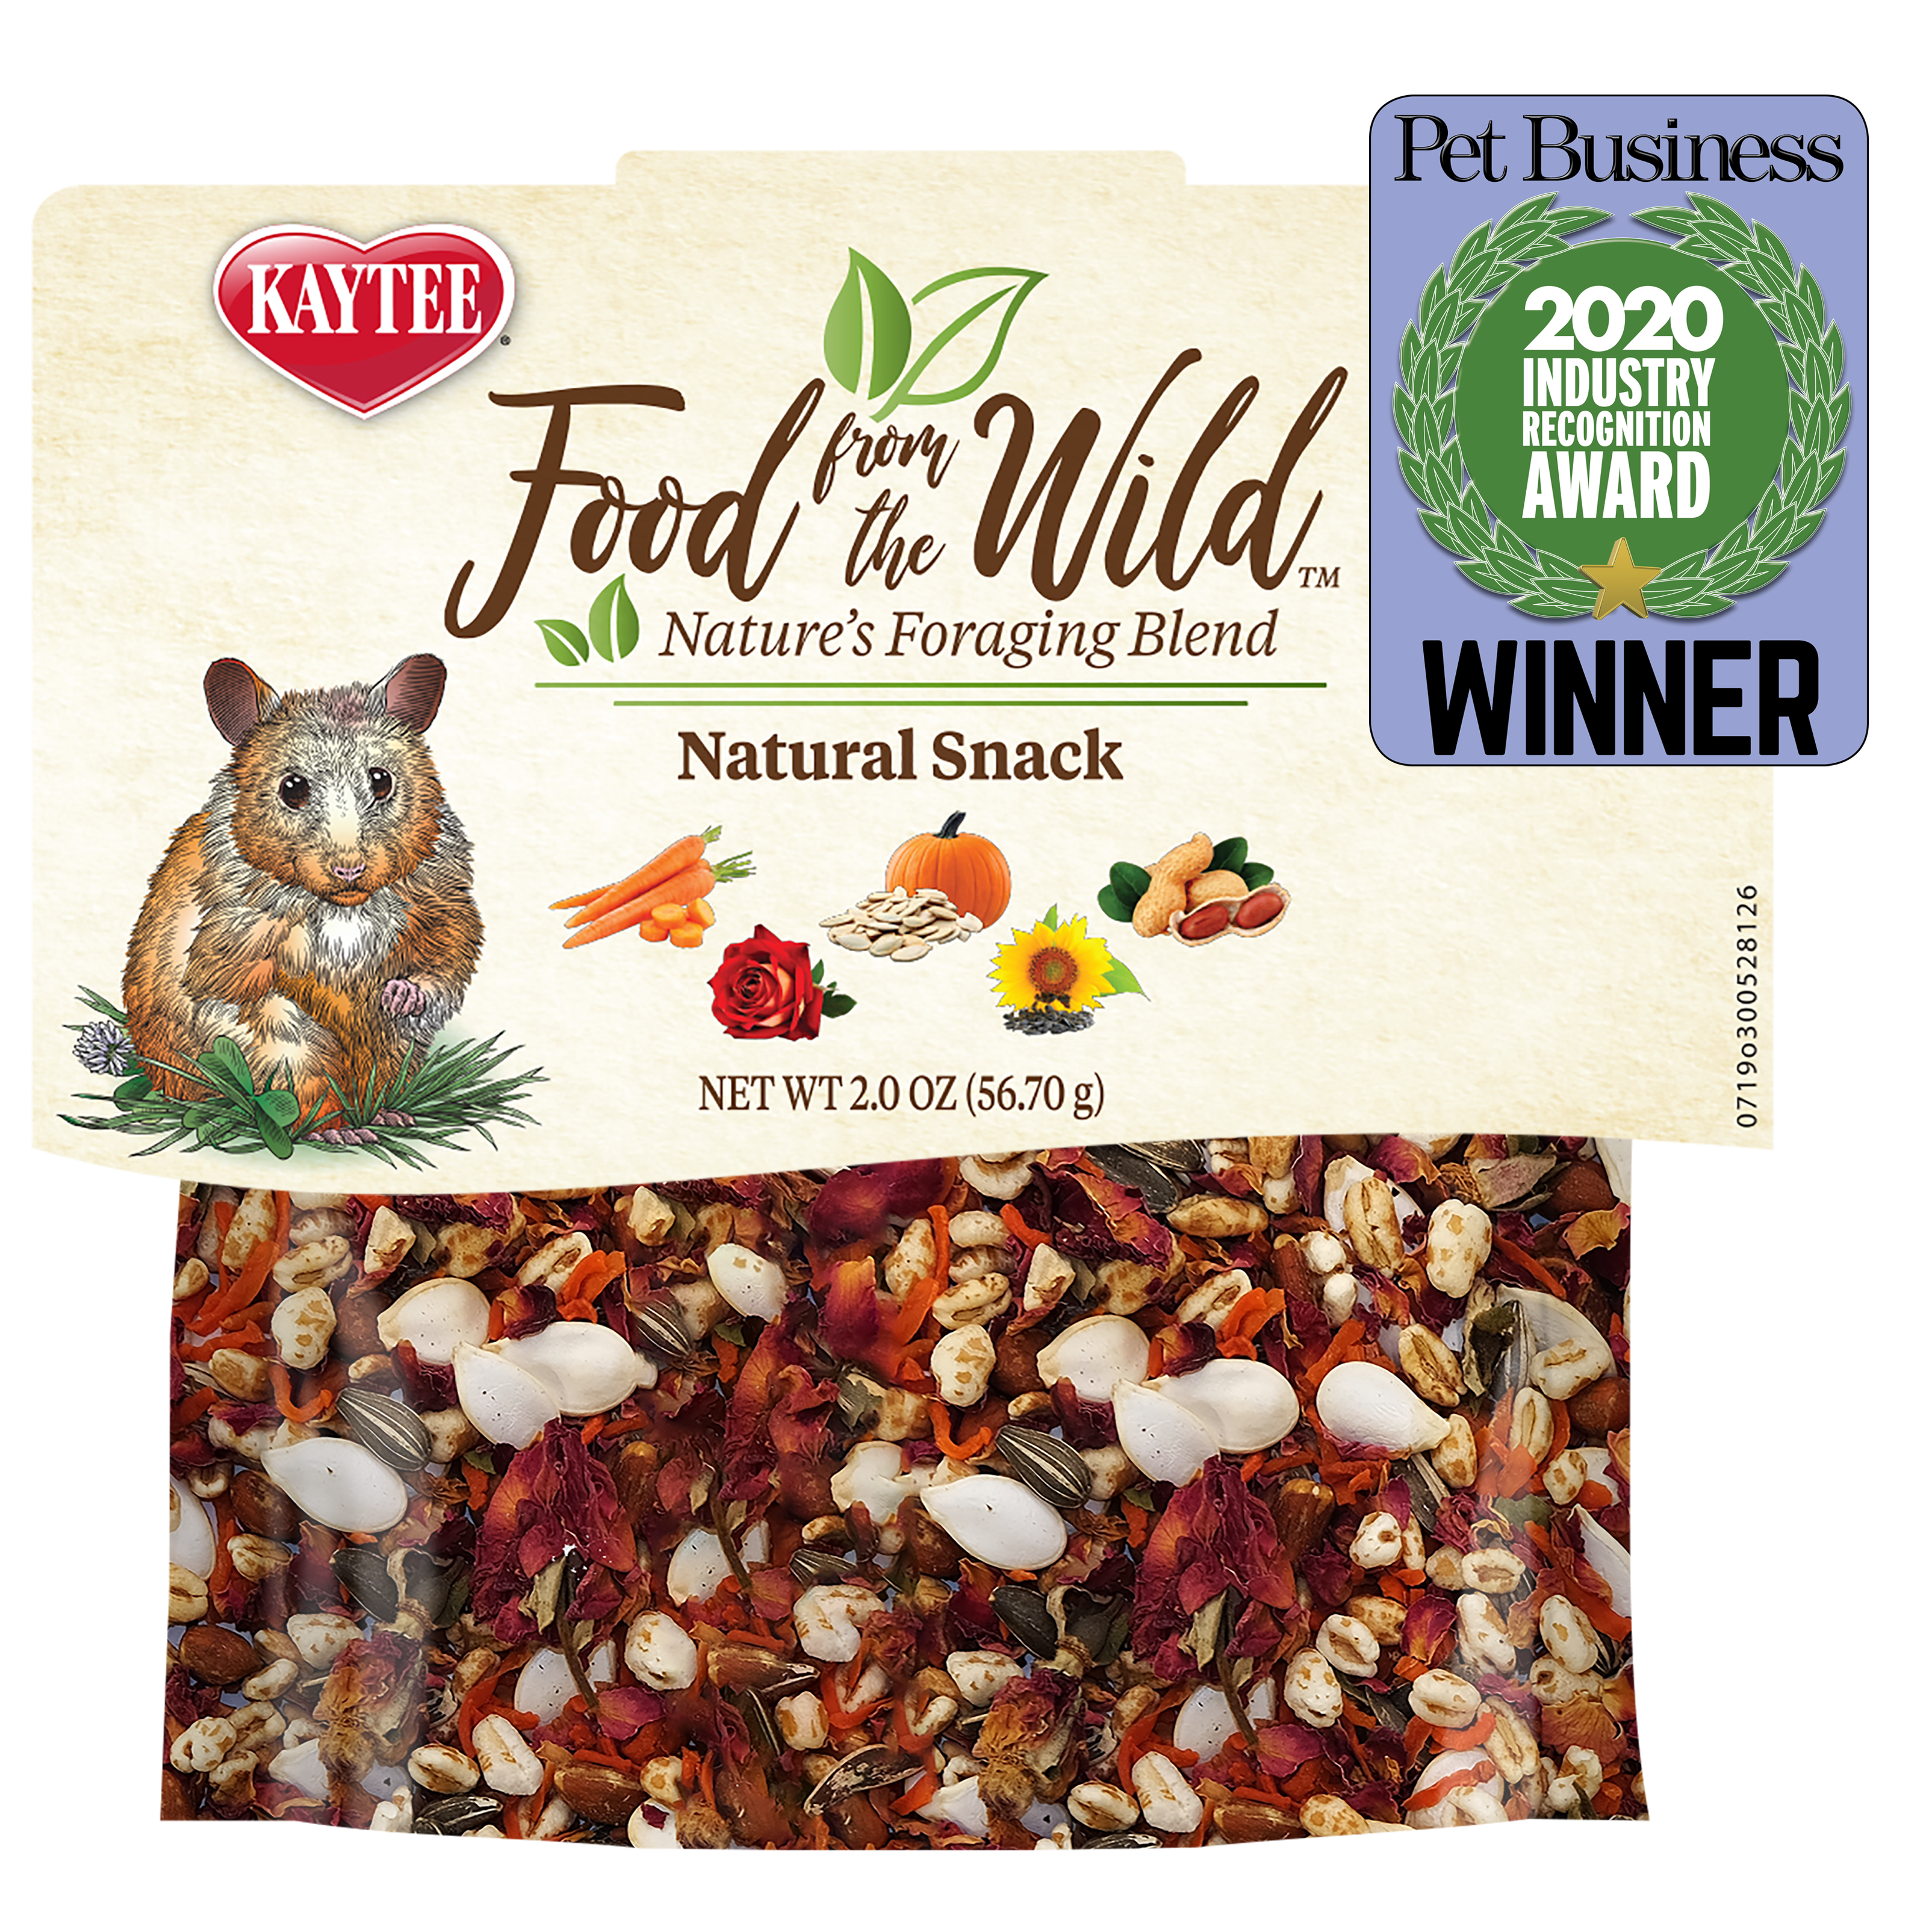 Food From the Wild Natural Snack